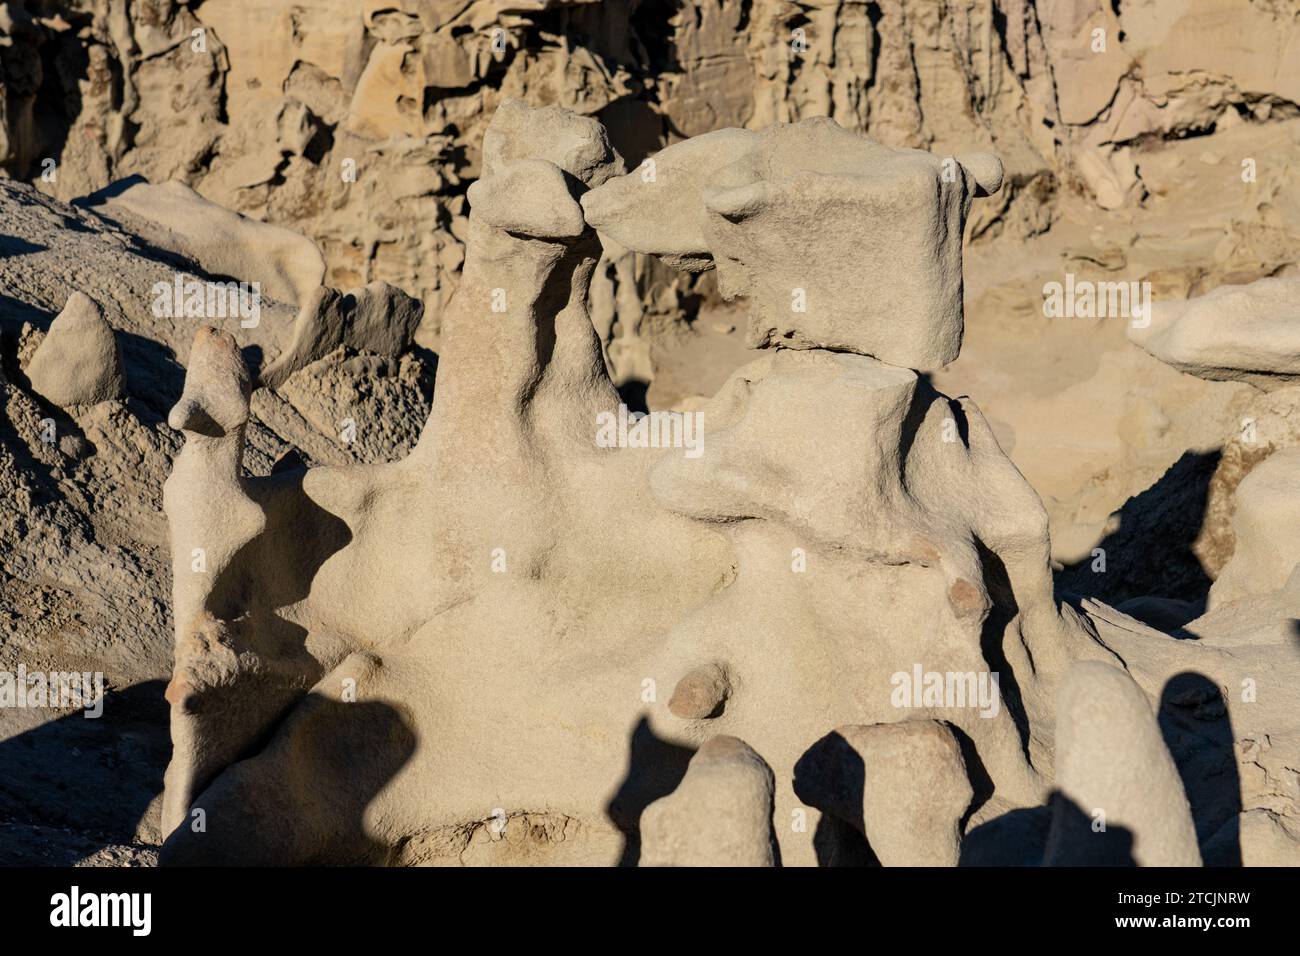 Fantastically eroded sandstone formations in the Fantasy Canyon Recreation Site, near Vernal, Utah. Stock Photo